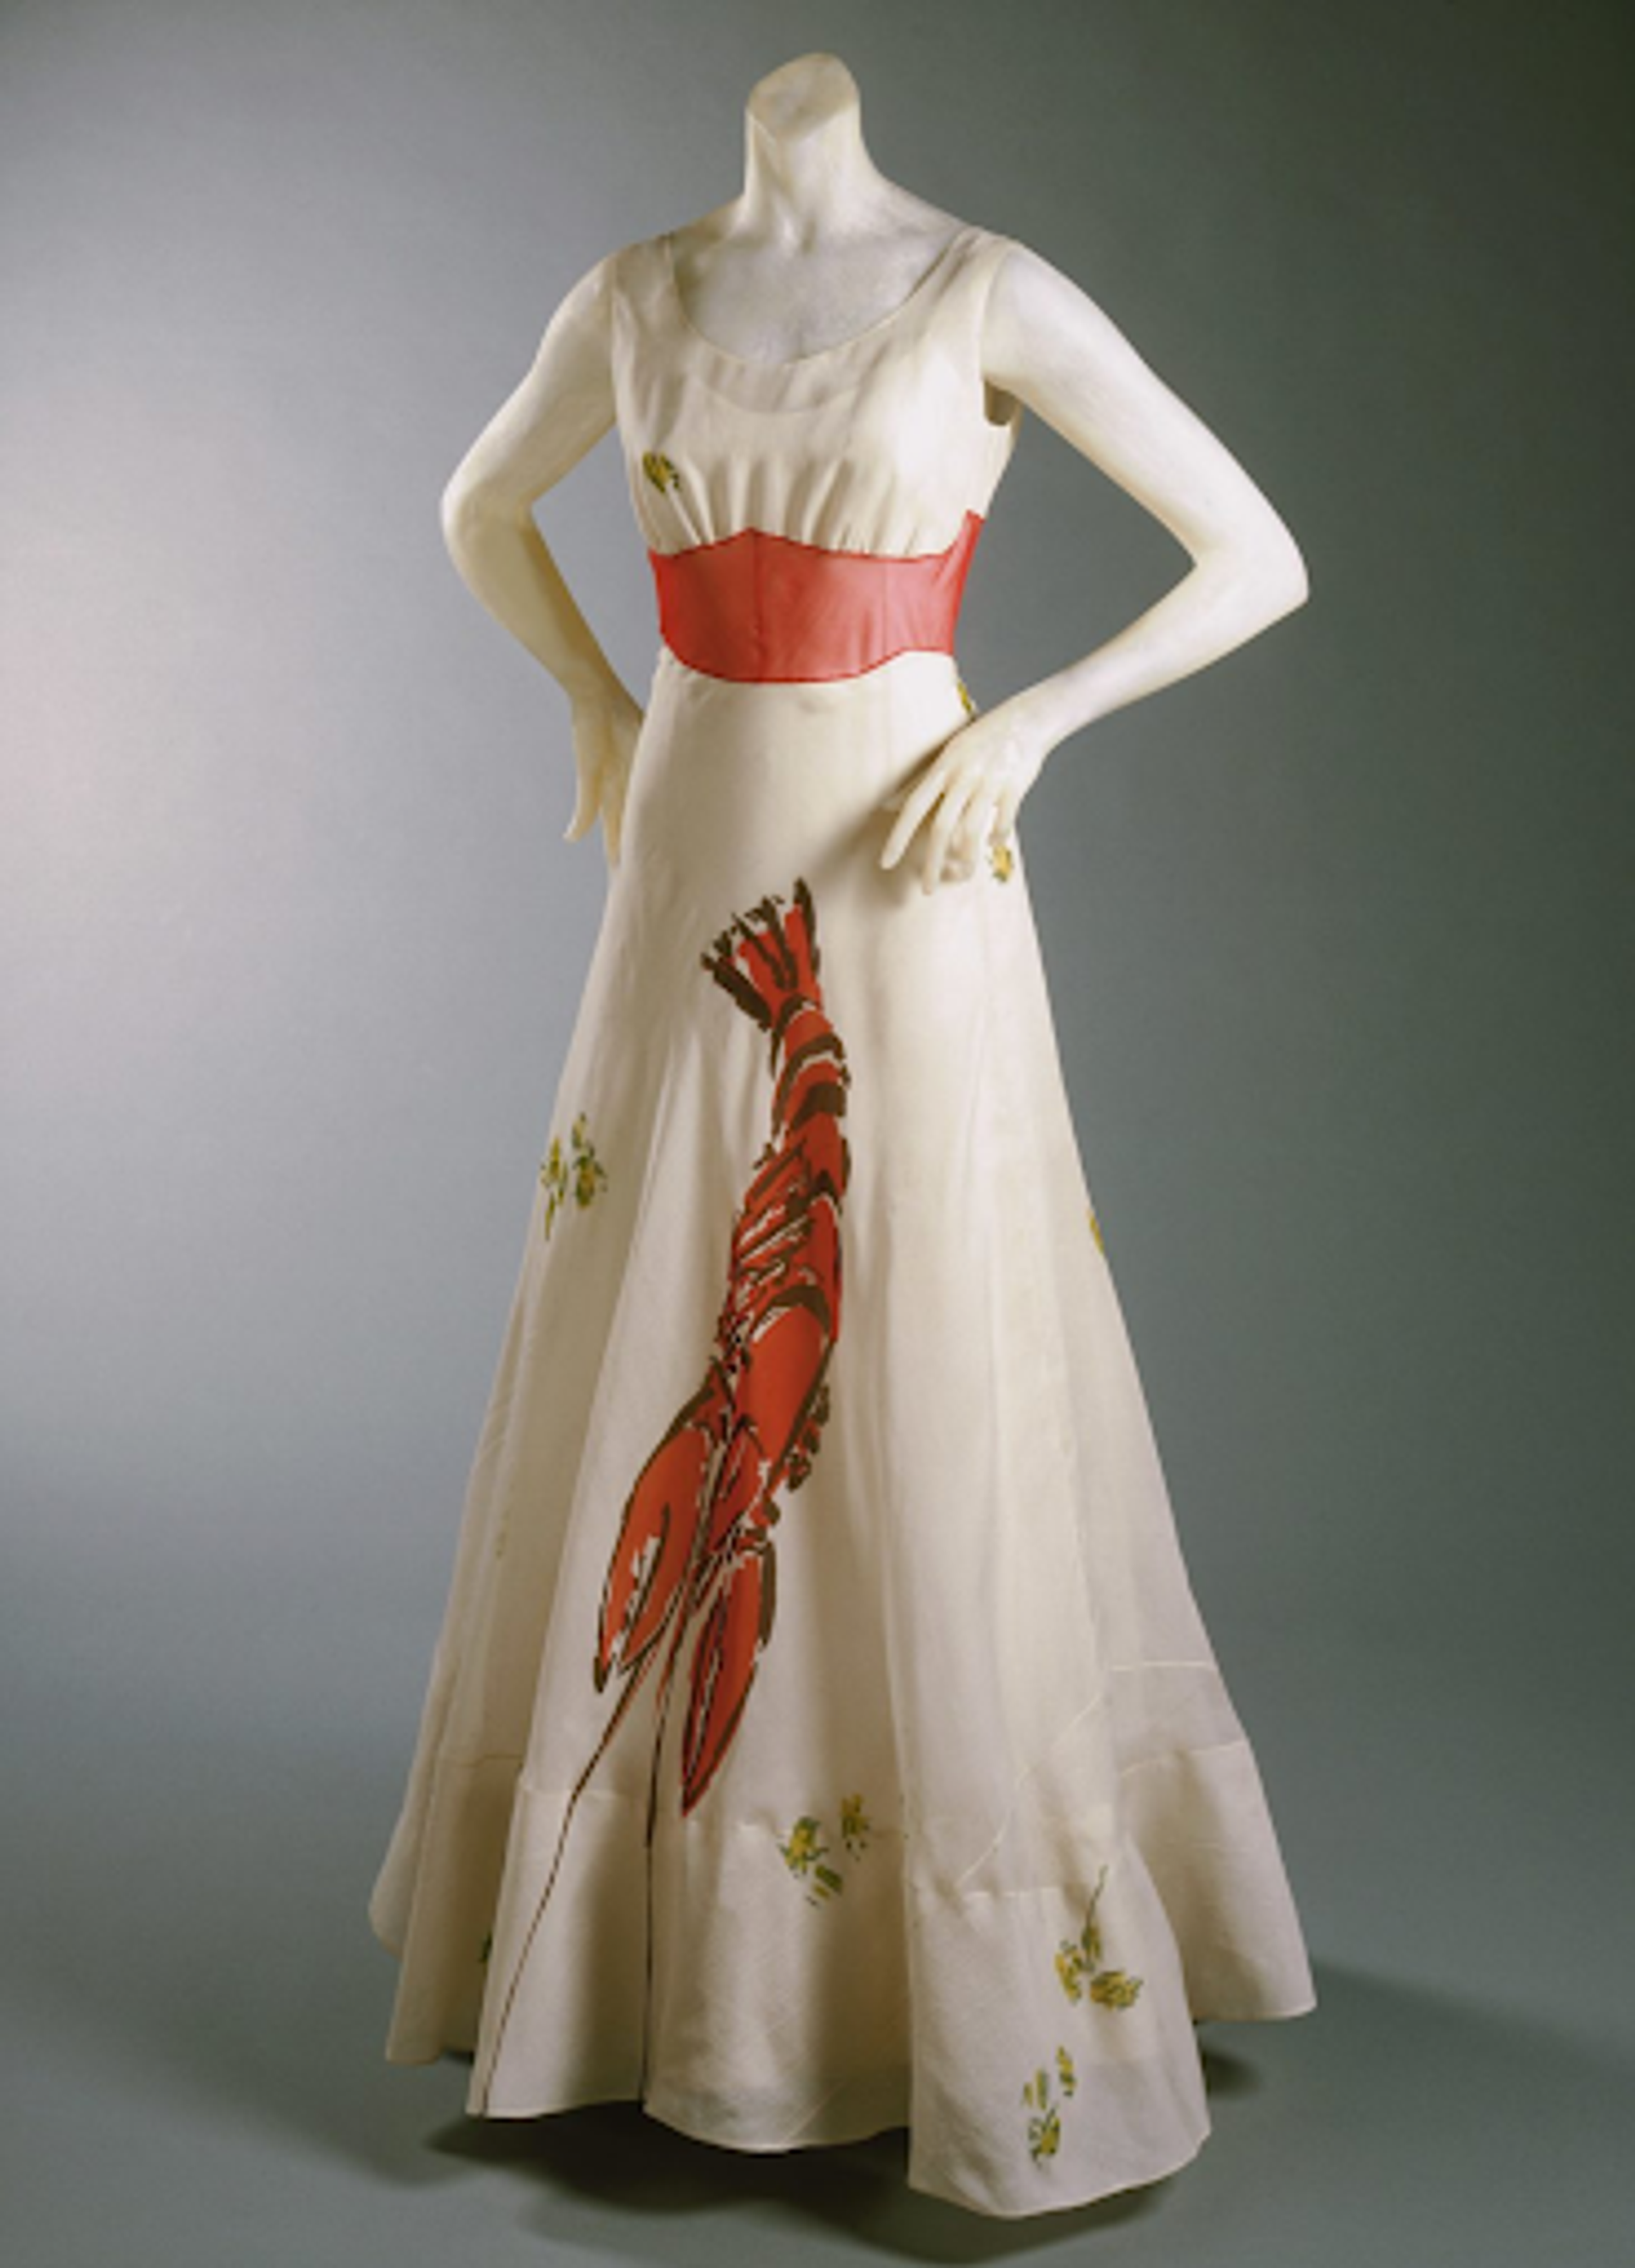 Photograph of a white, sleeveless dress with a lobster on it